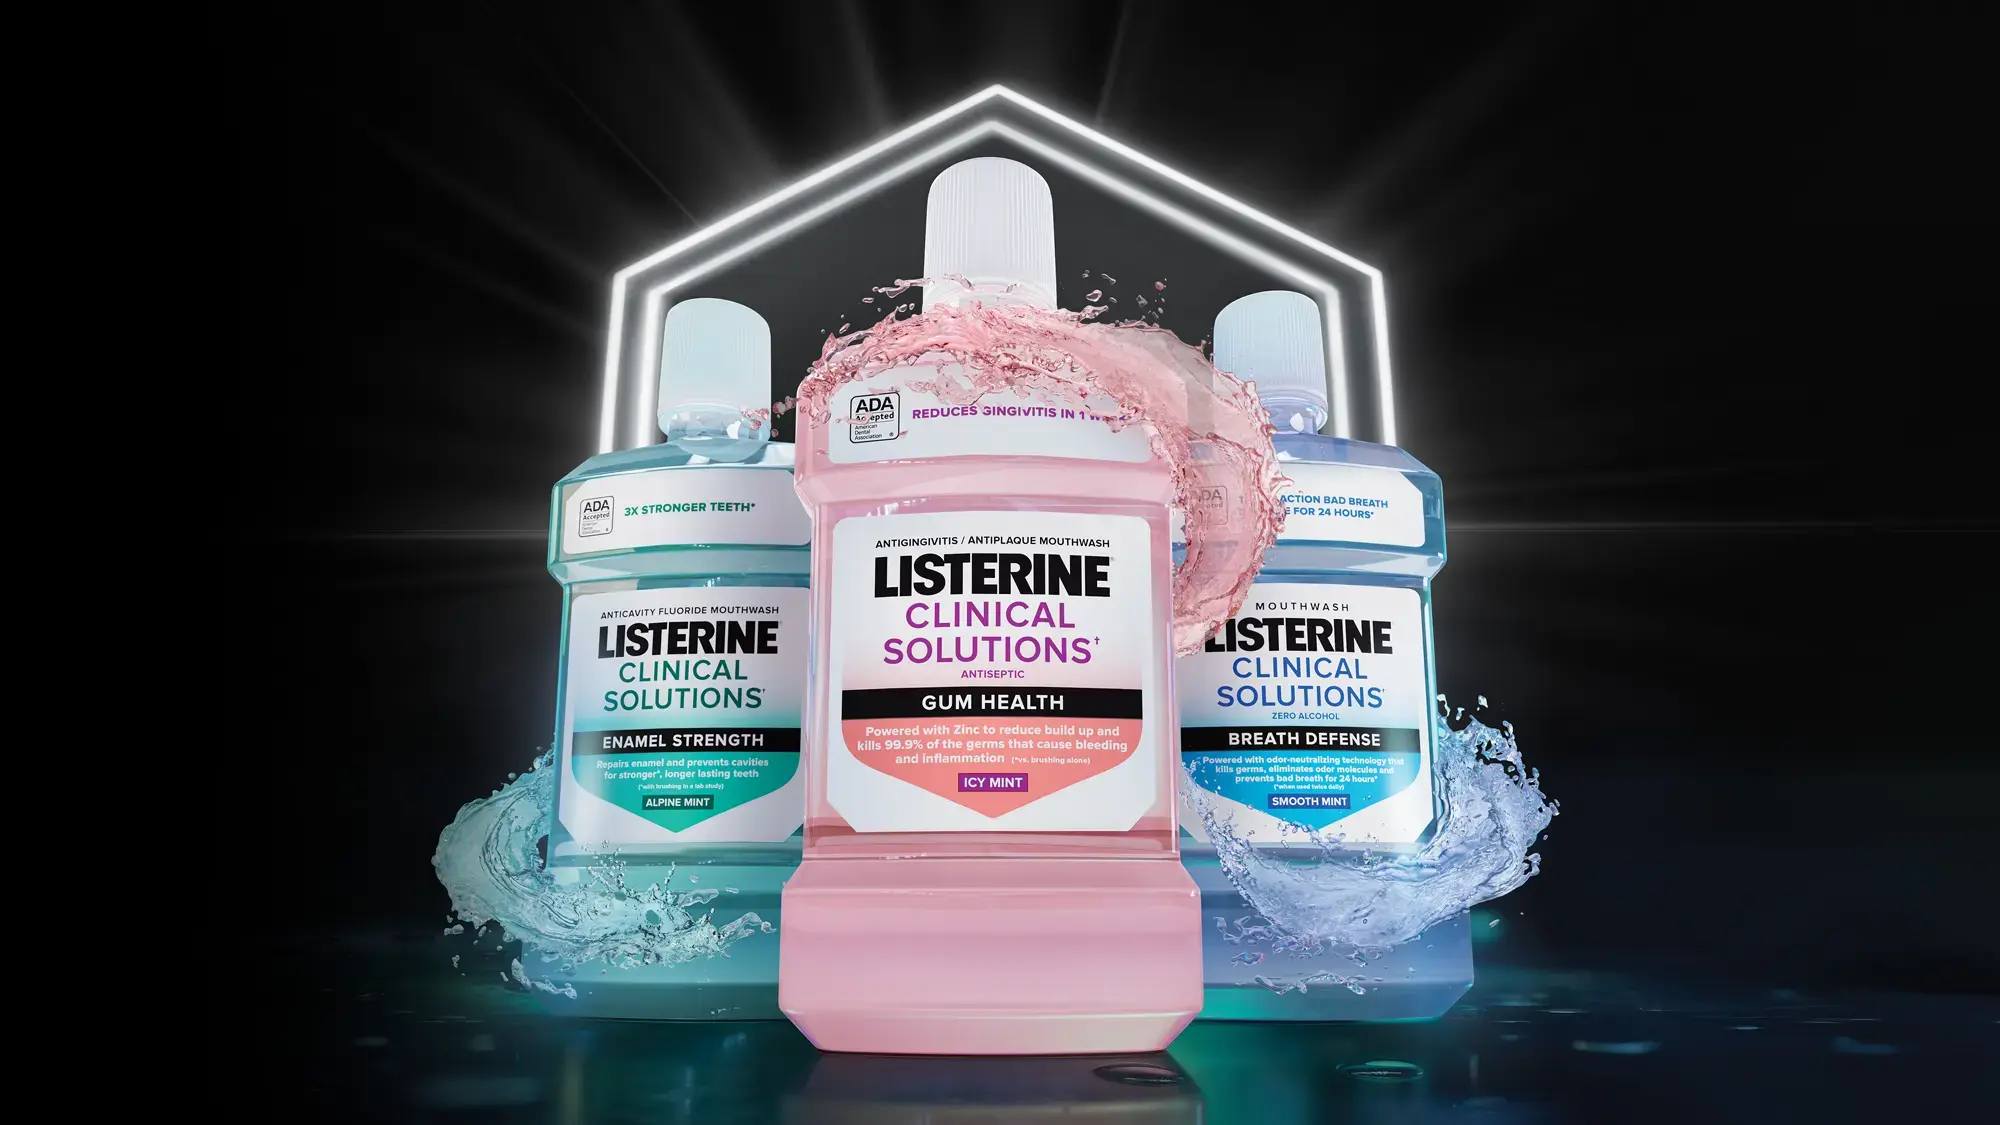 Listerine Clinical Solutions Mouthwashes for Gum Health, Teeth Strength, and Breath Defense.